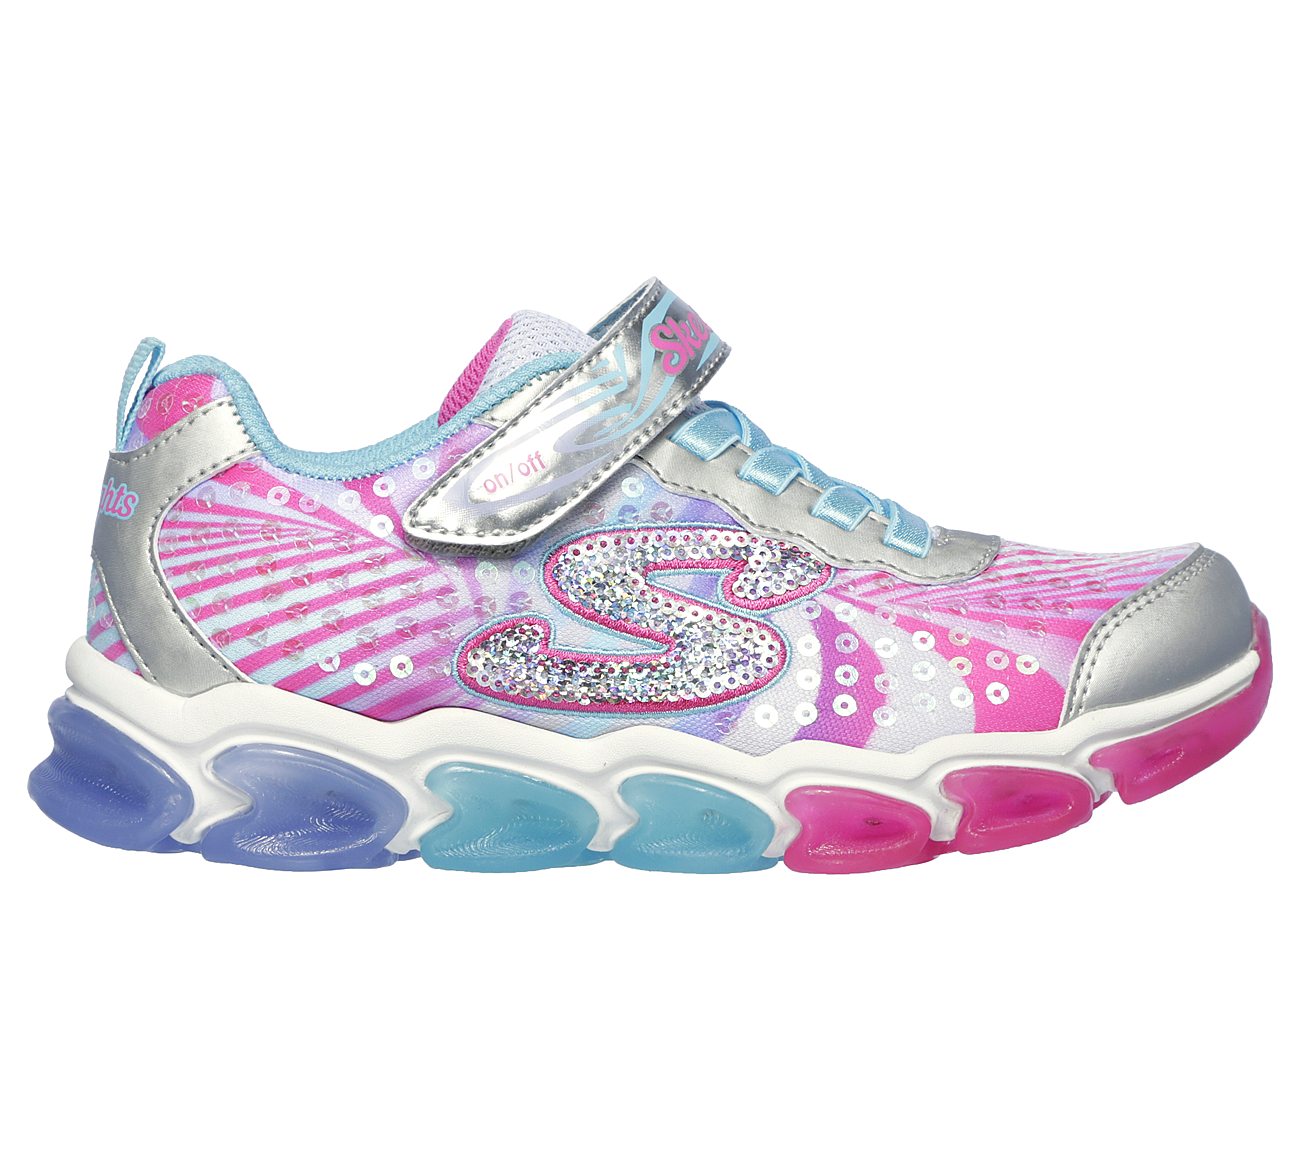 skechers light up jelly shoes